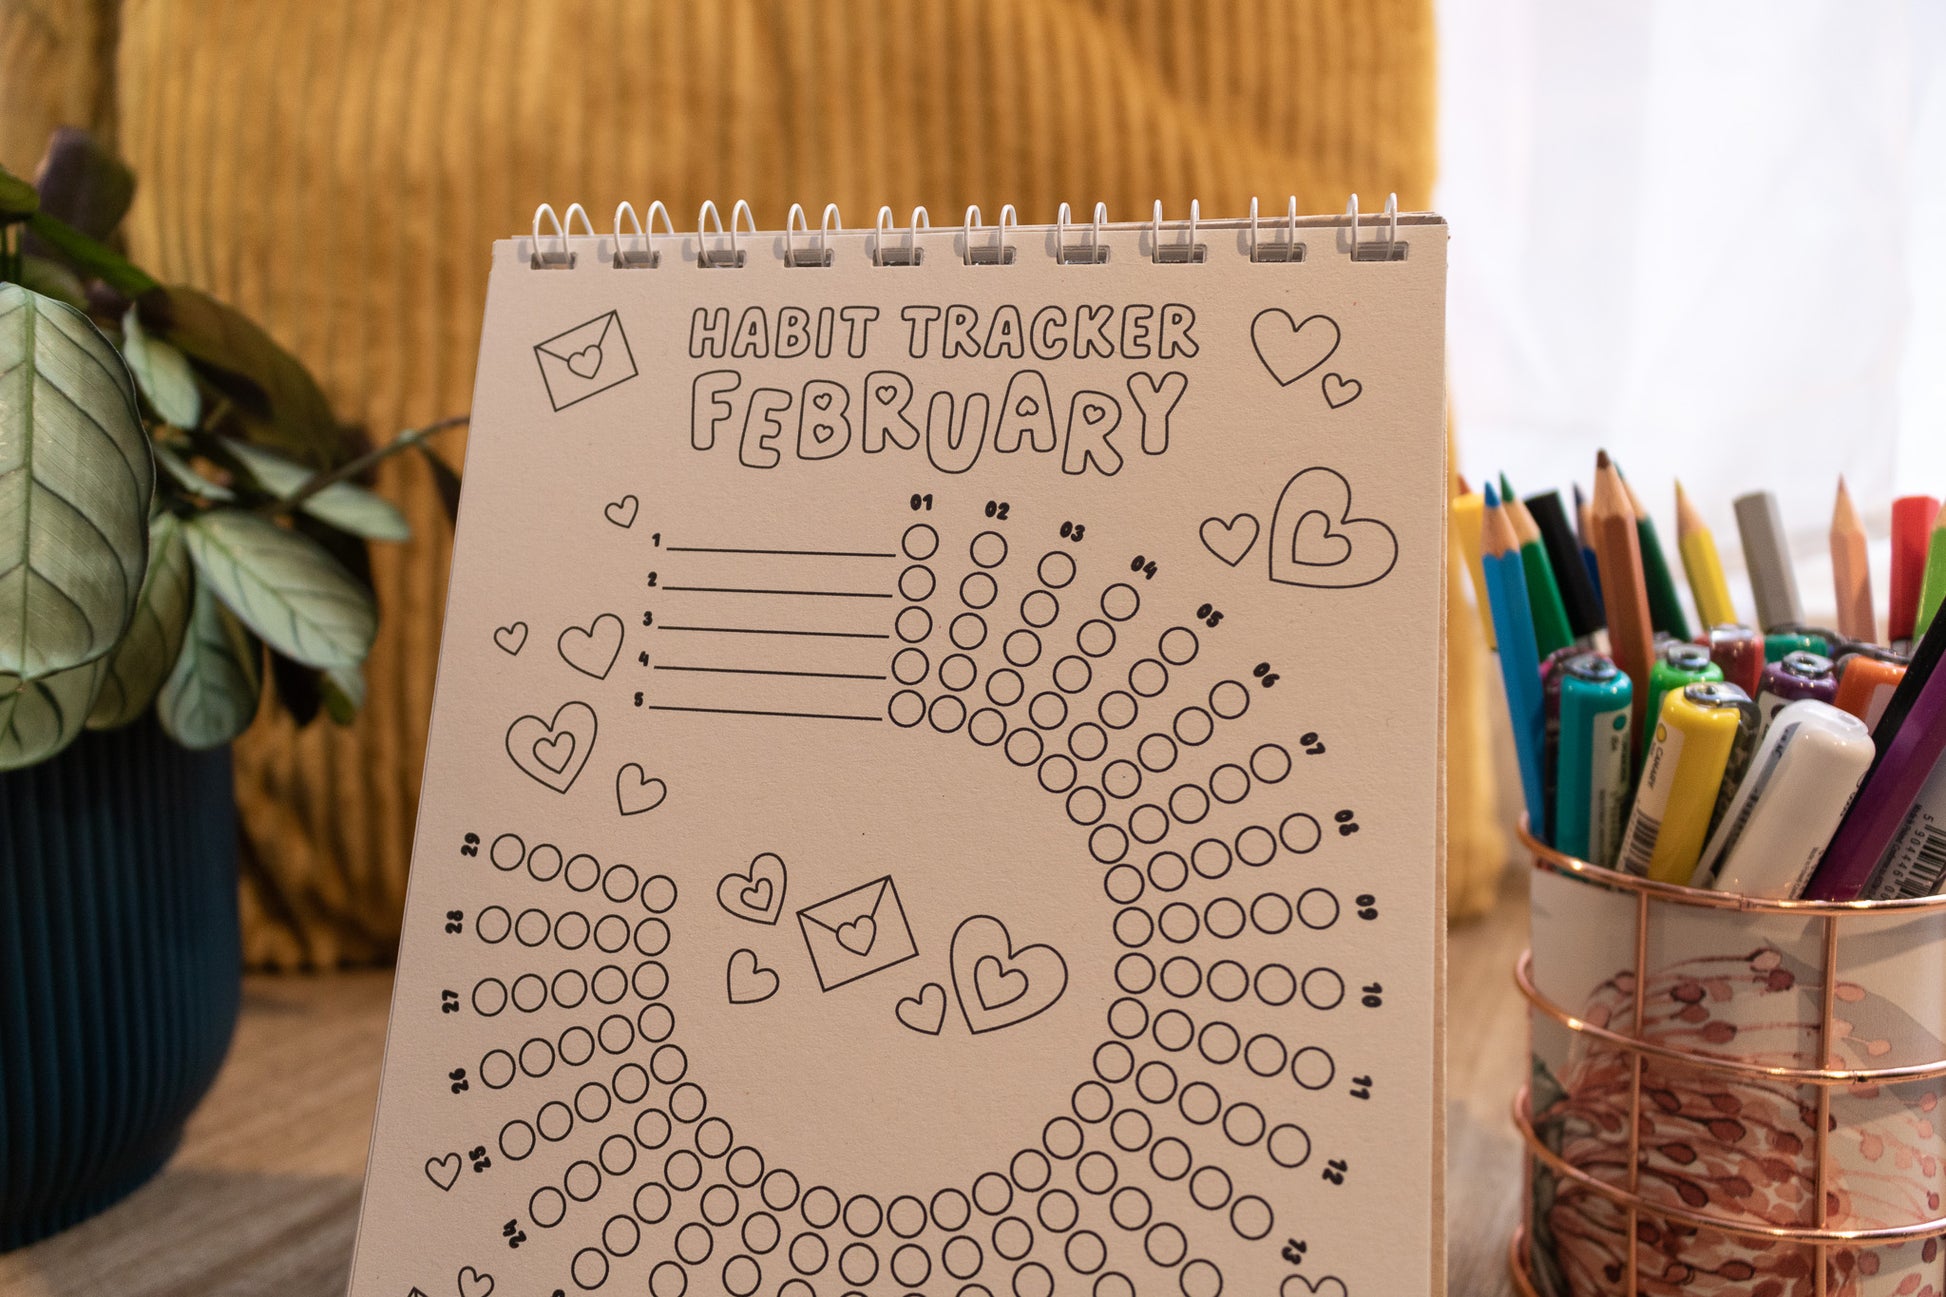 12-month Colouring Habit Tracker by MellowApricotStudio - A5 & A6 standing desk calendar - february page